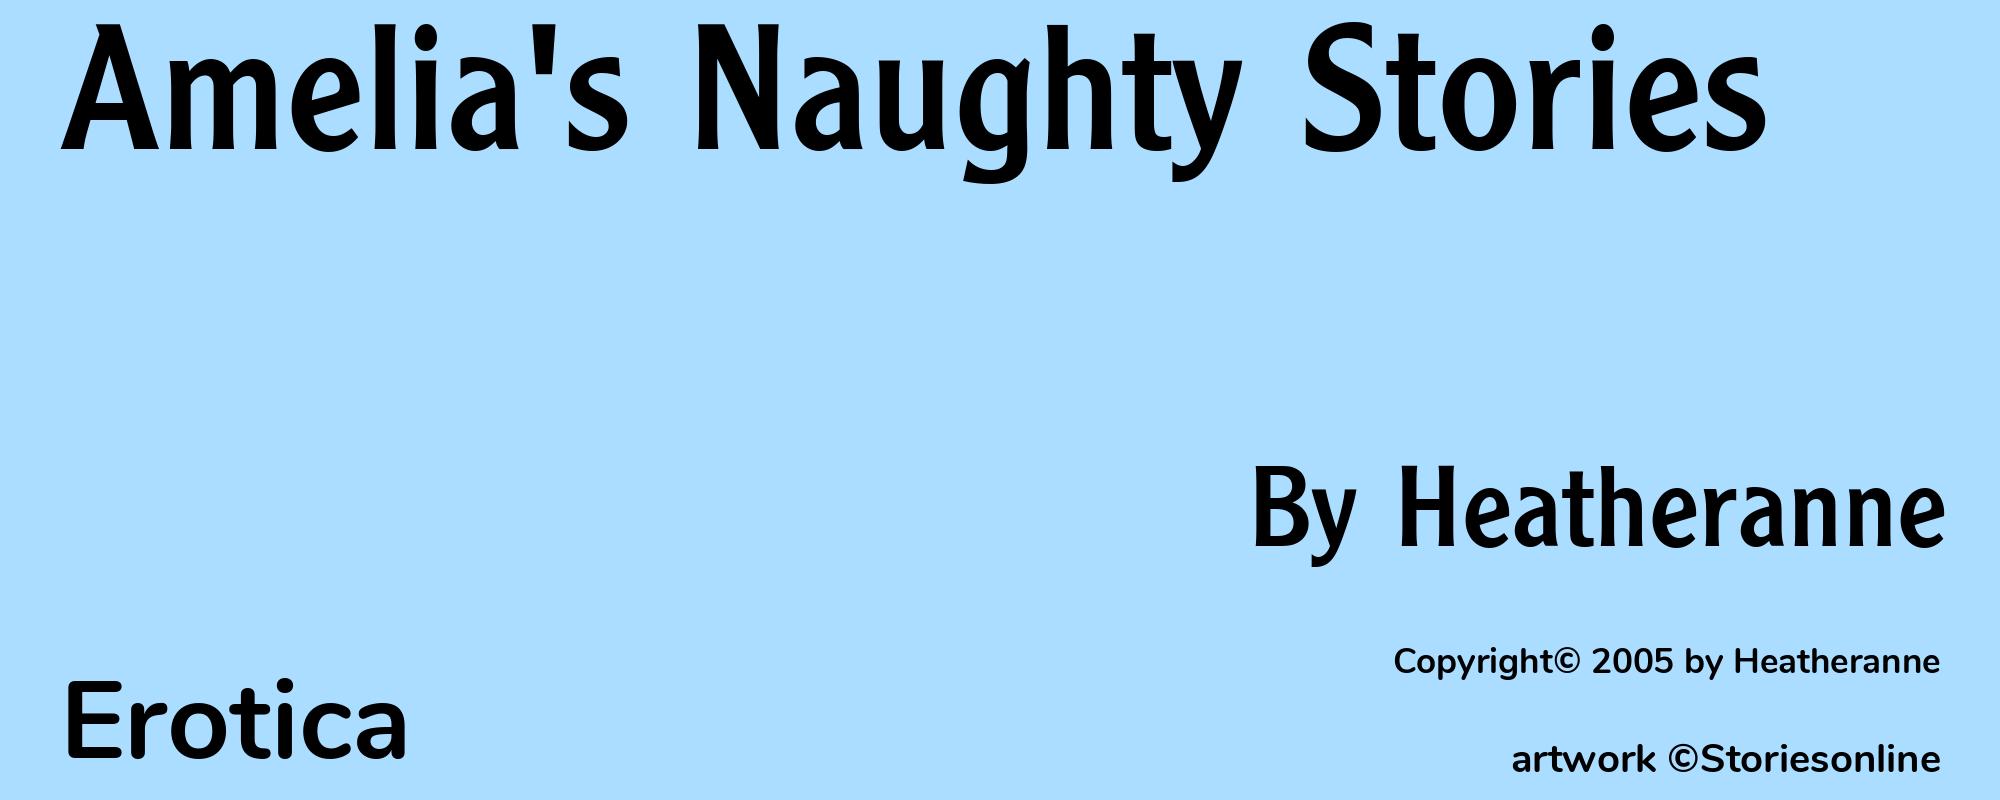 Amelia's Naughty Stories - Cover